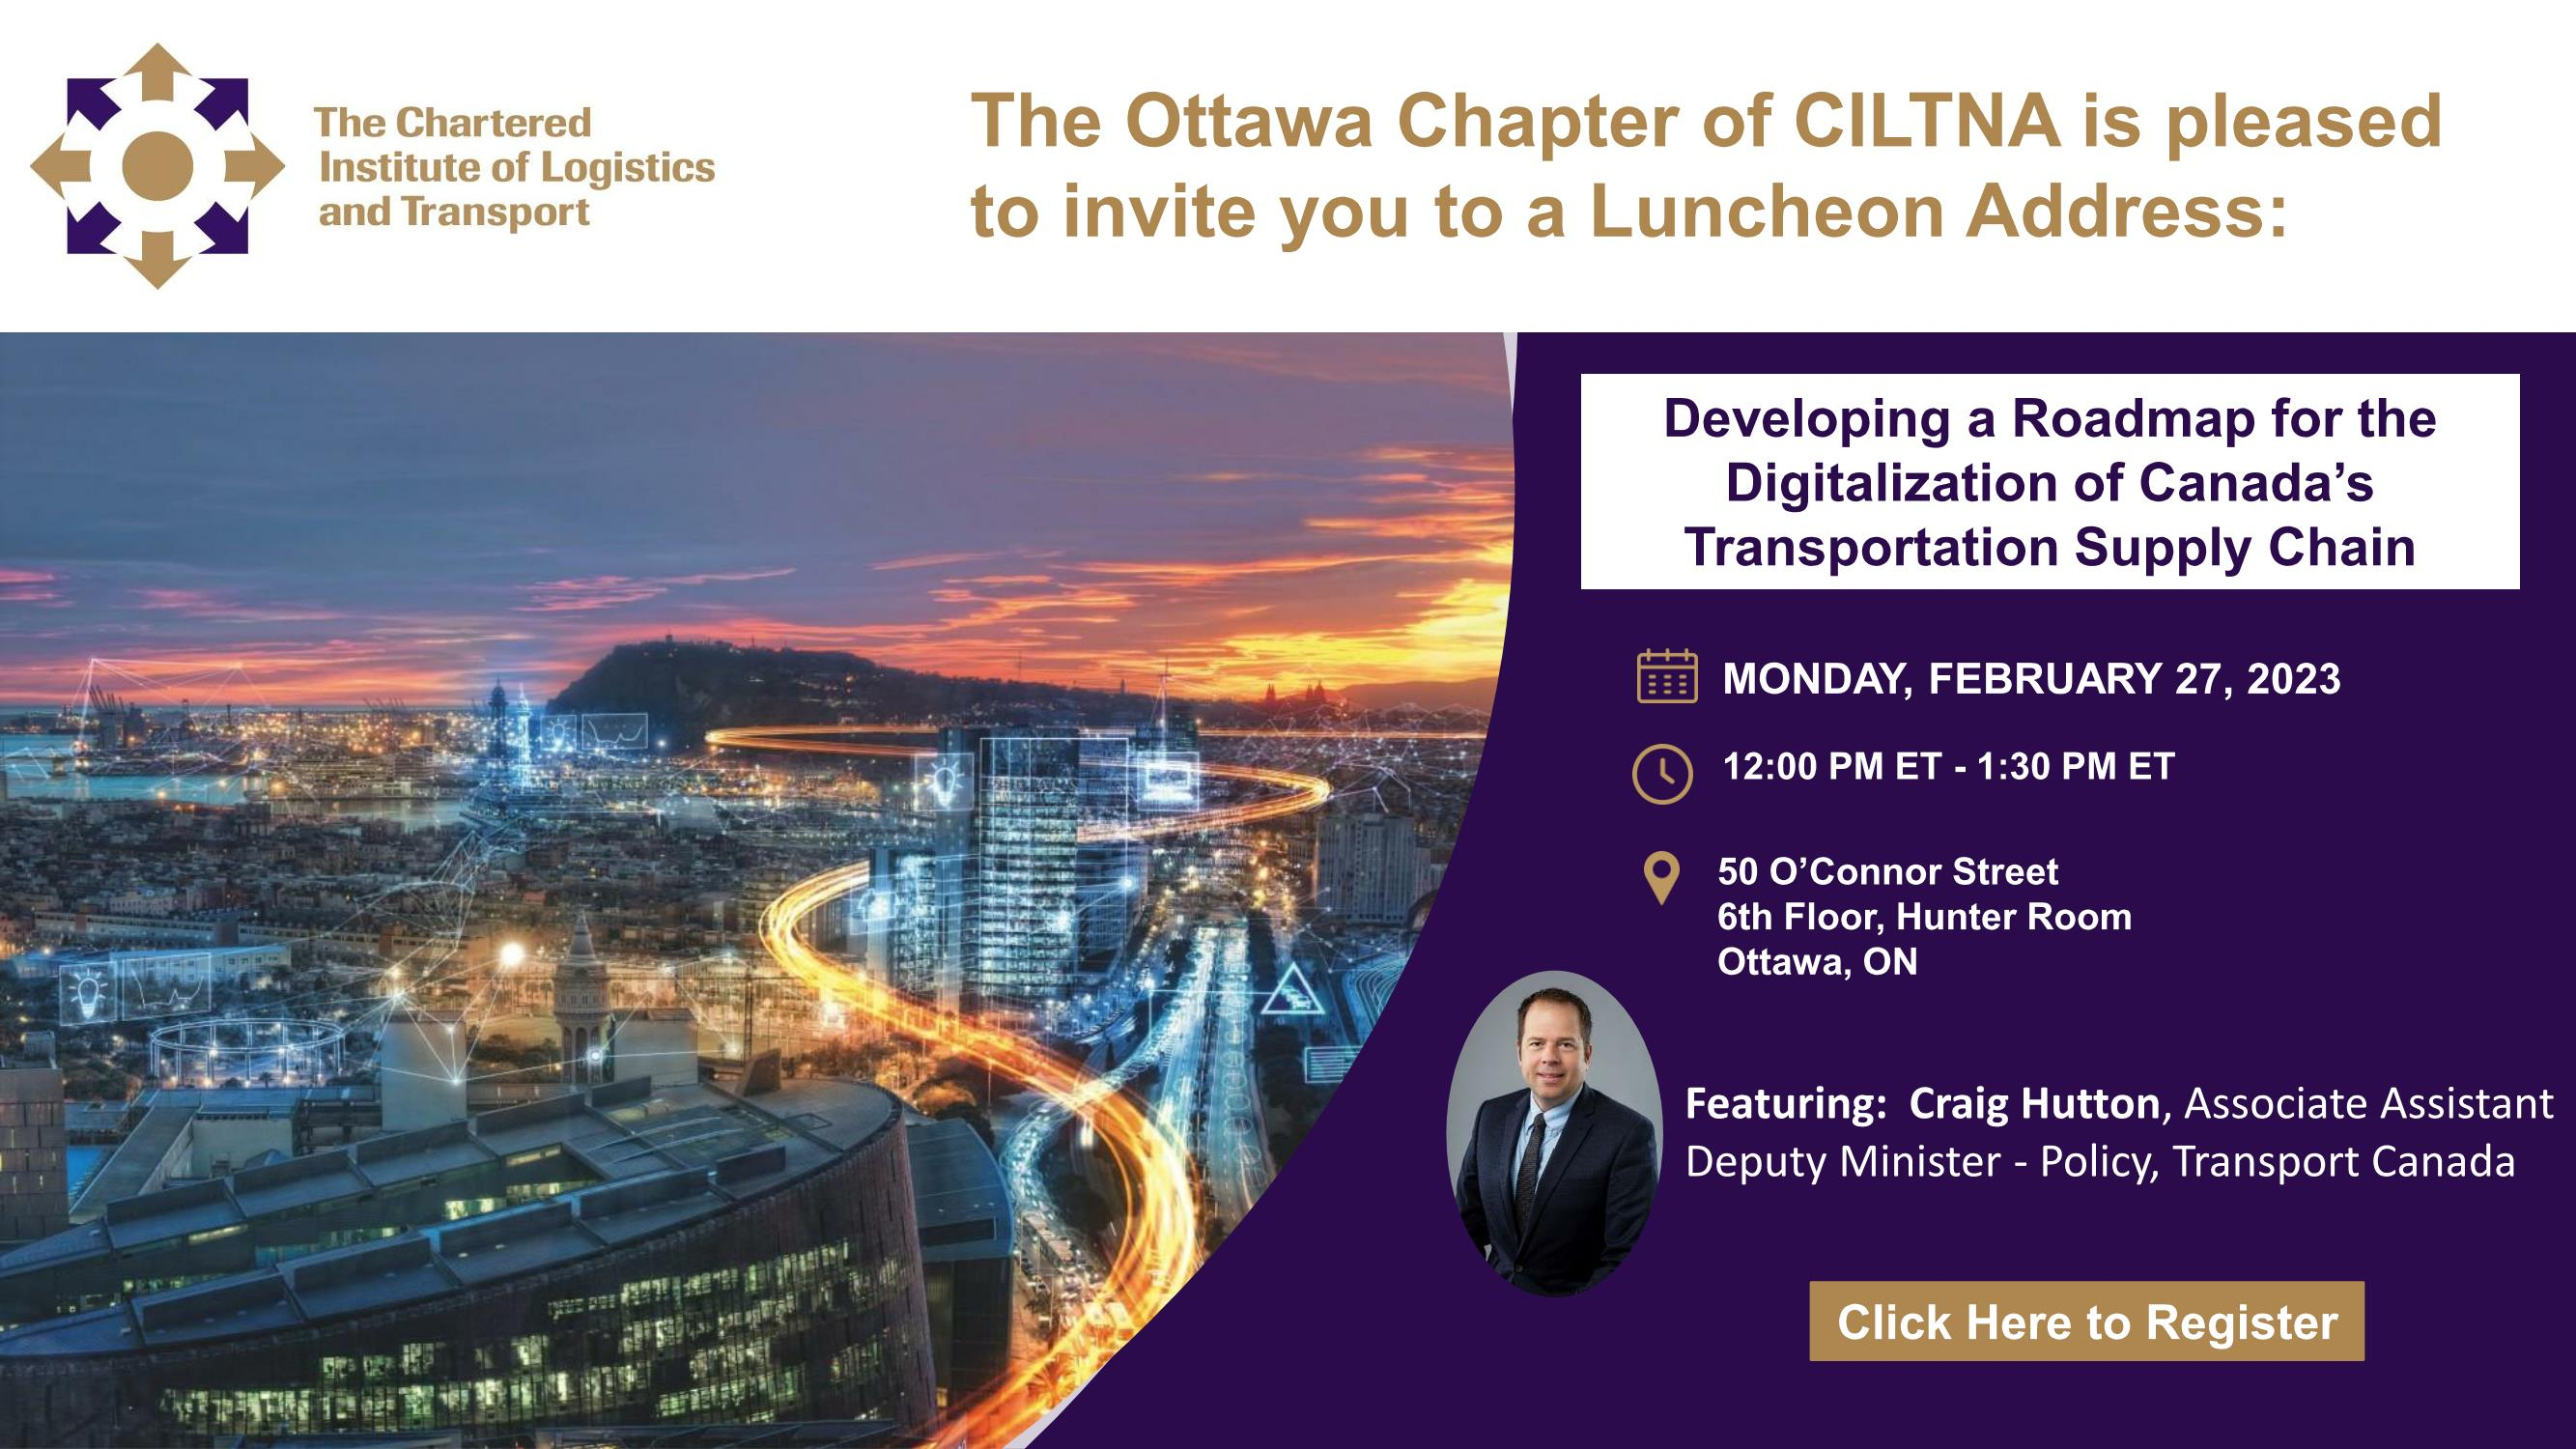 February 27, 2023 - Ottawa Chapter Luncheon Address: “Developing a Roadmap for the Digitalization of Canada’s Transportation Supply Chain” with guest speaker Craig Hutton, Associate Assistant Deputy Minister - Policy, Transport Canada